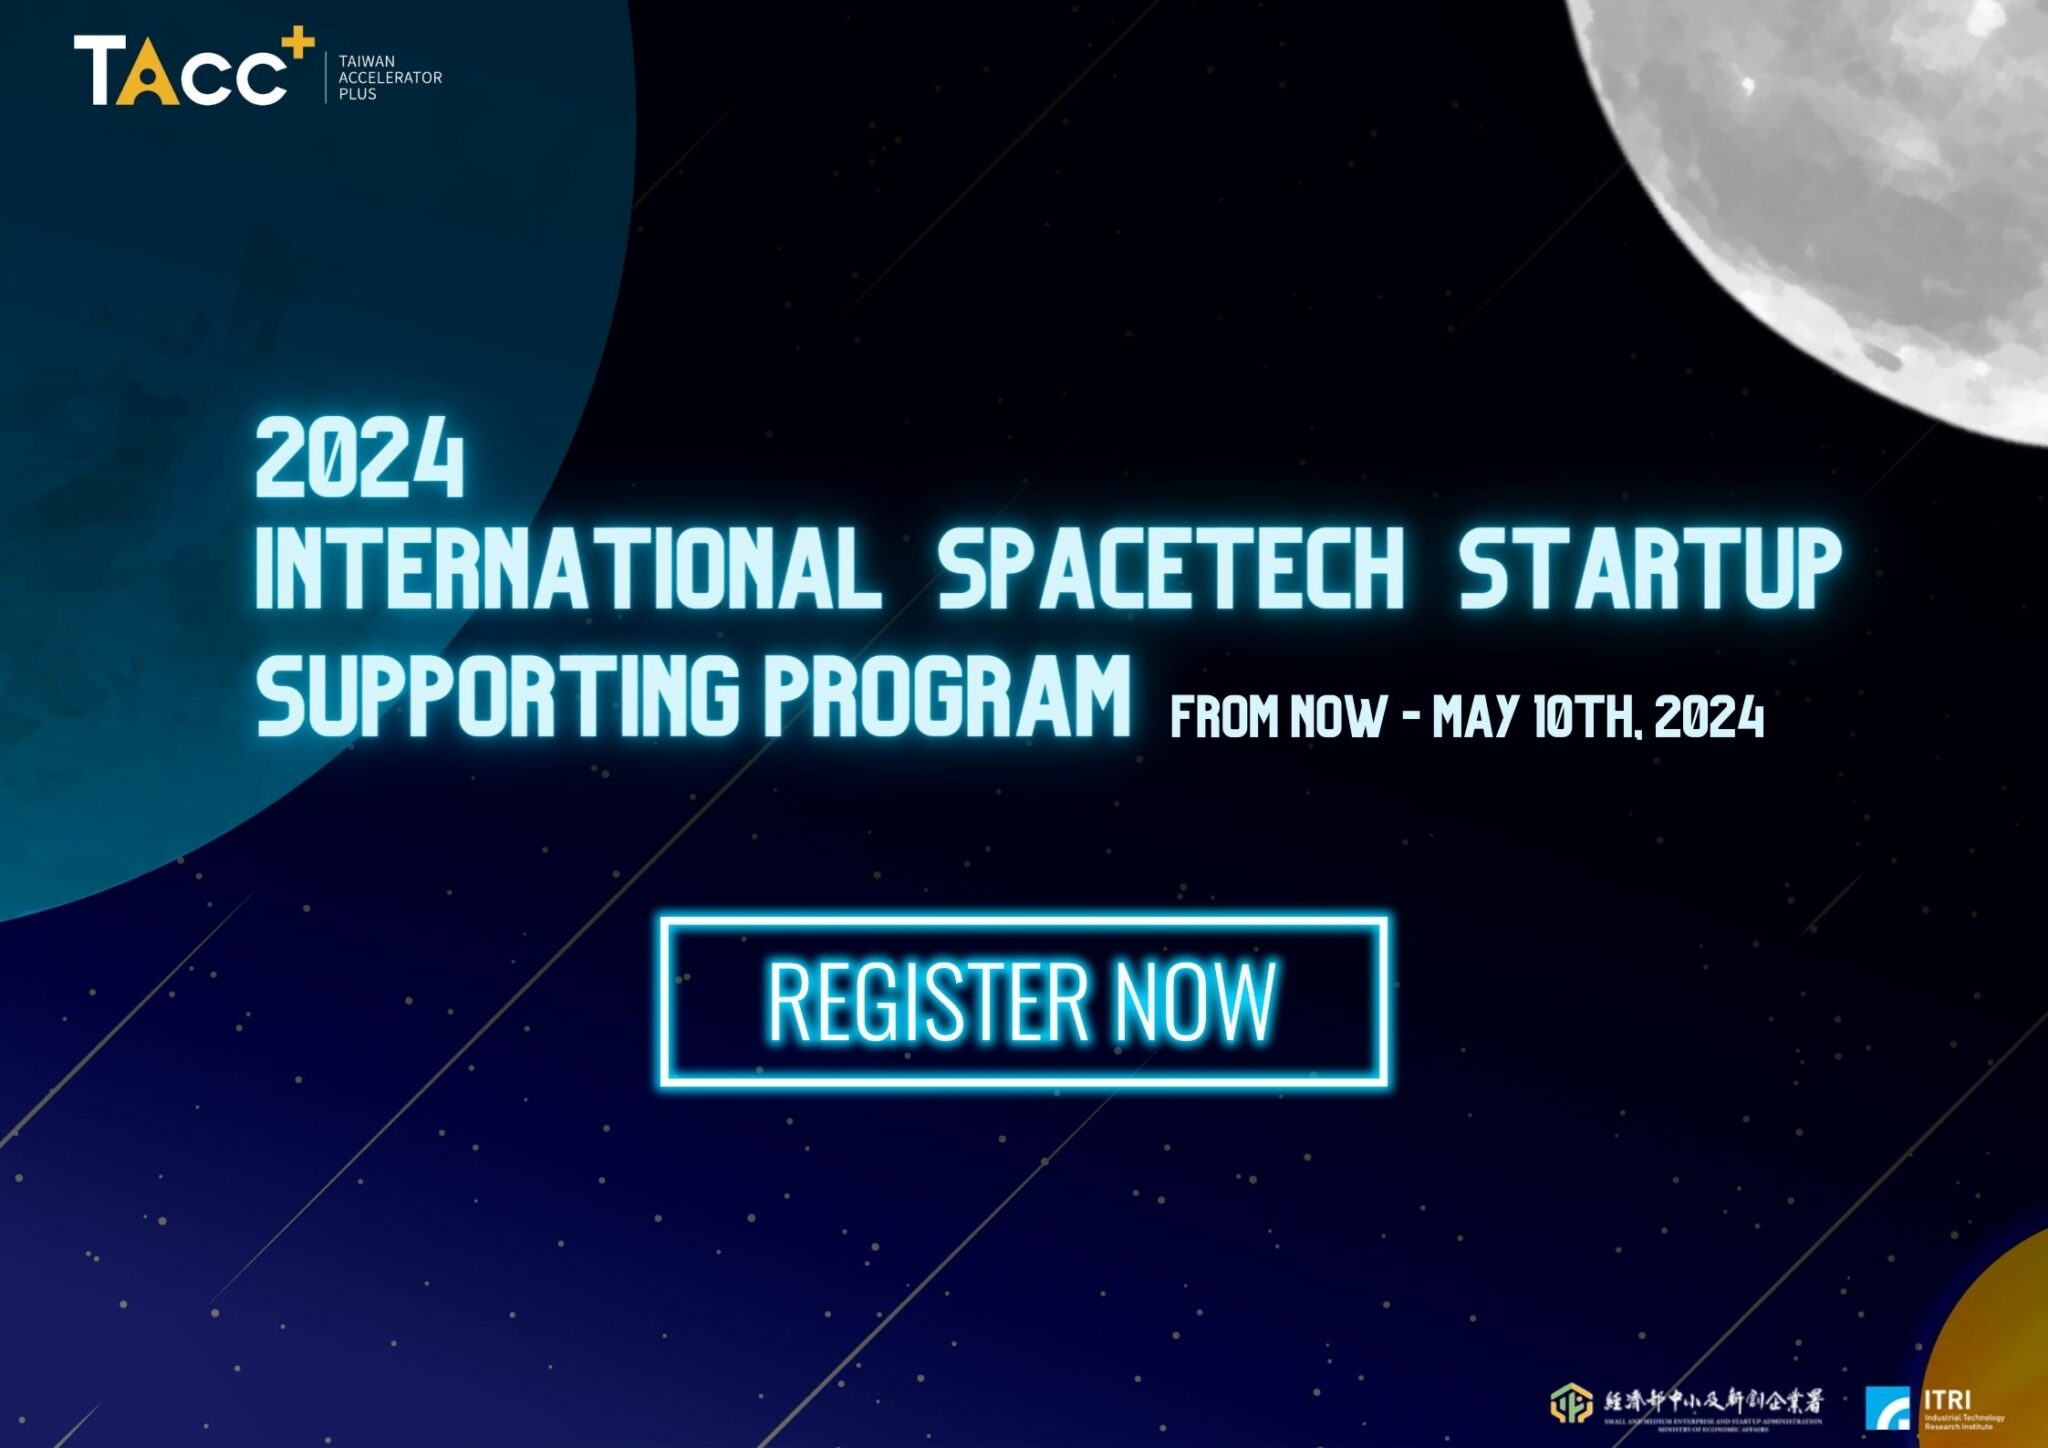 2024 International SpaceTech Startup Supporting Program